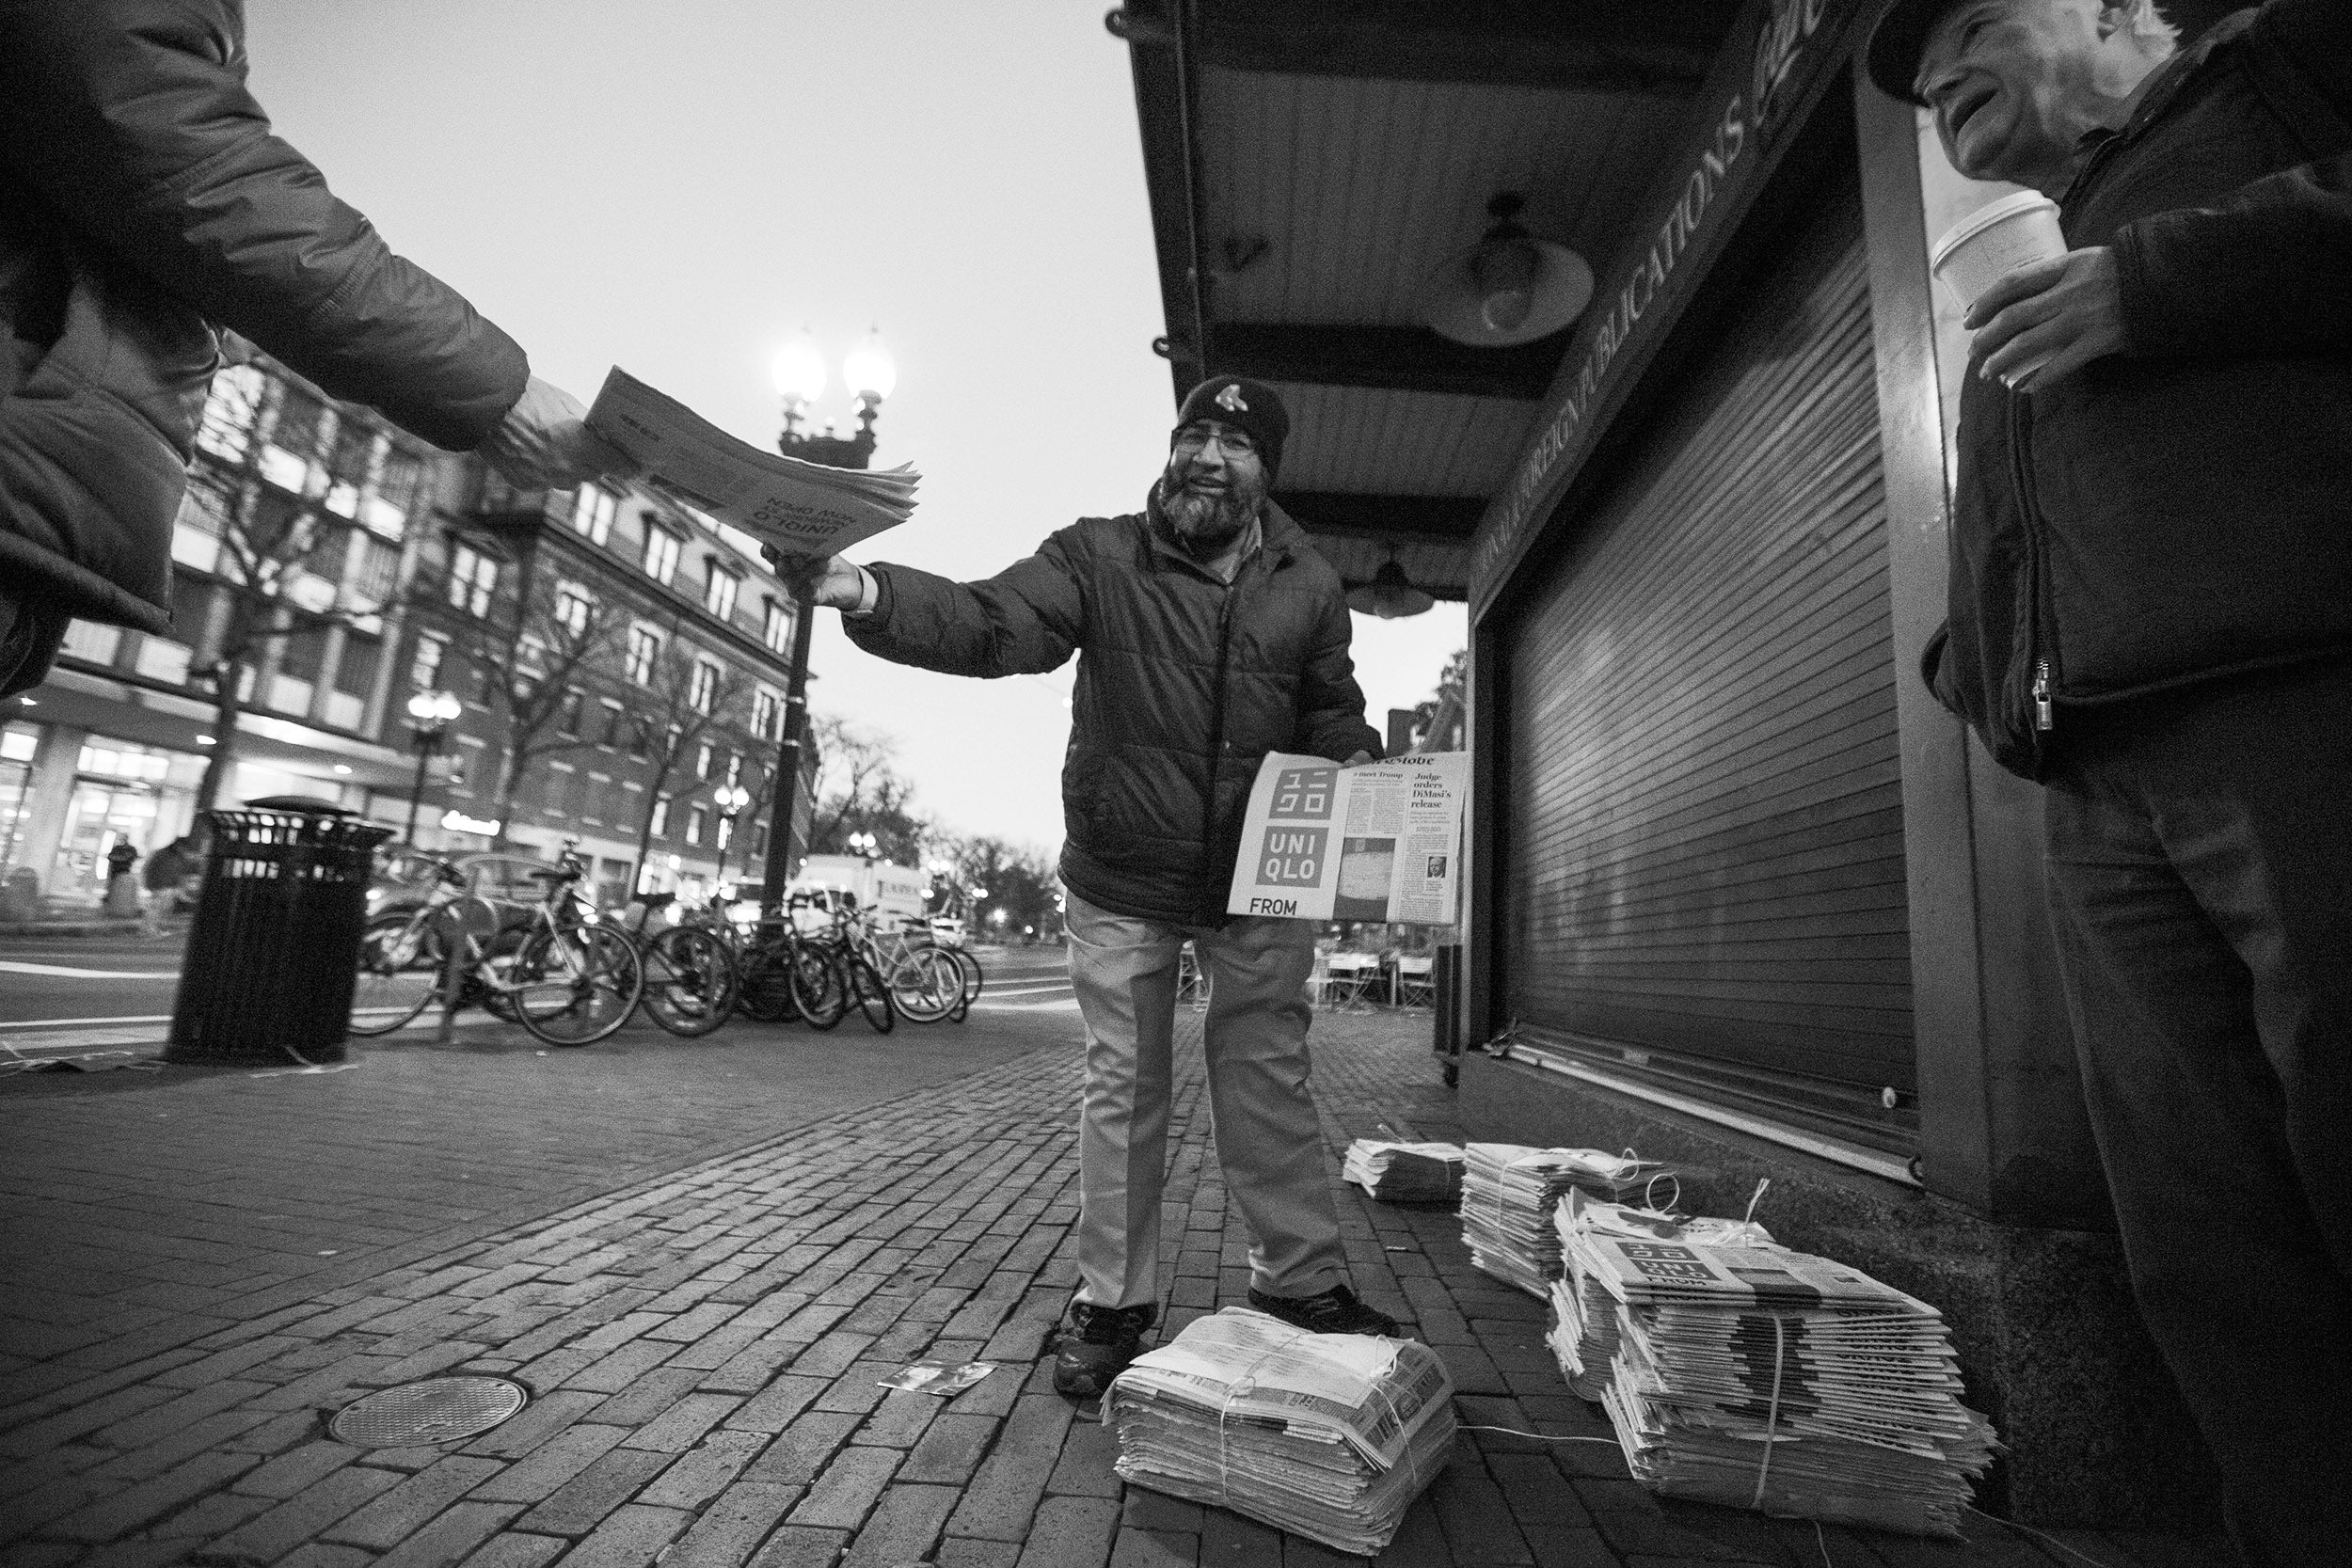 Mohamed Rahman hands out newspapers in Harvard Square.